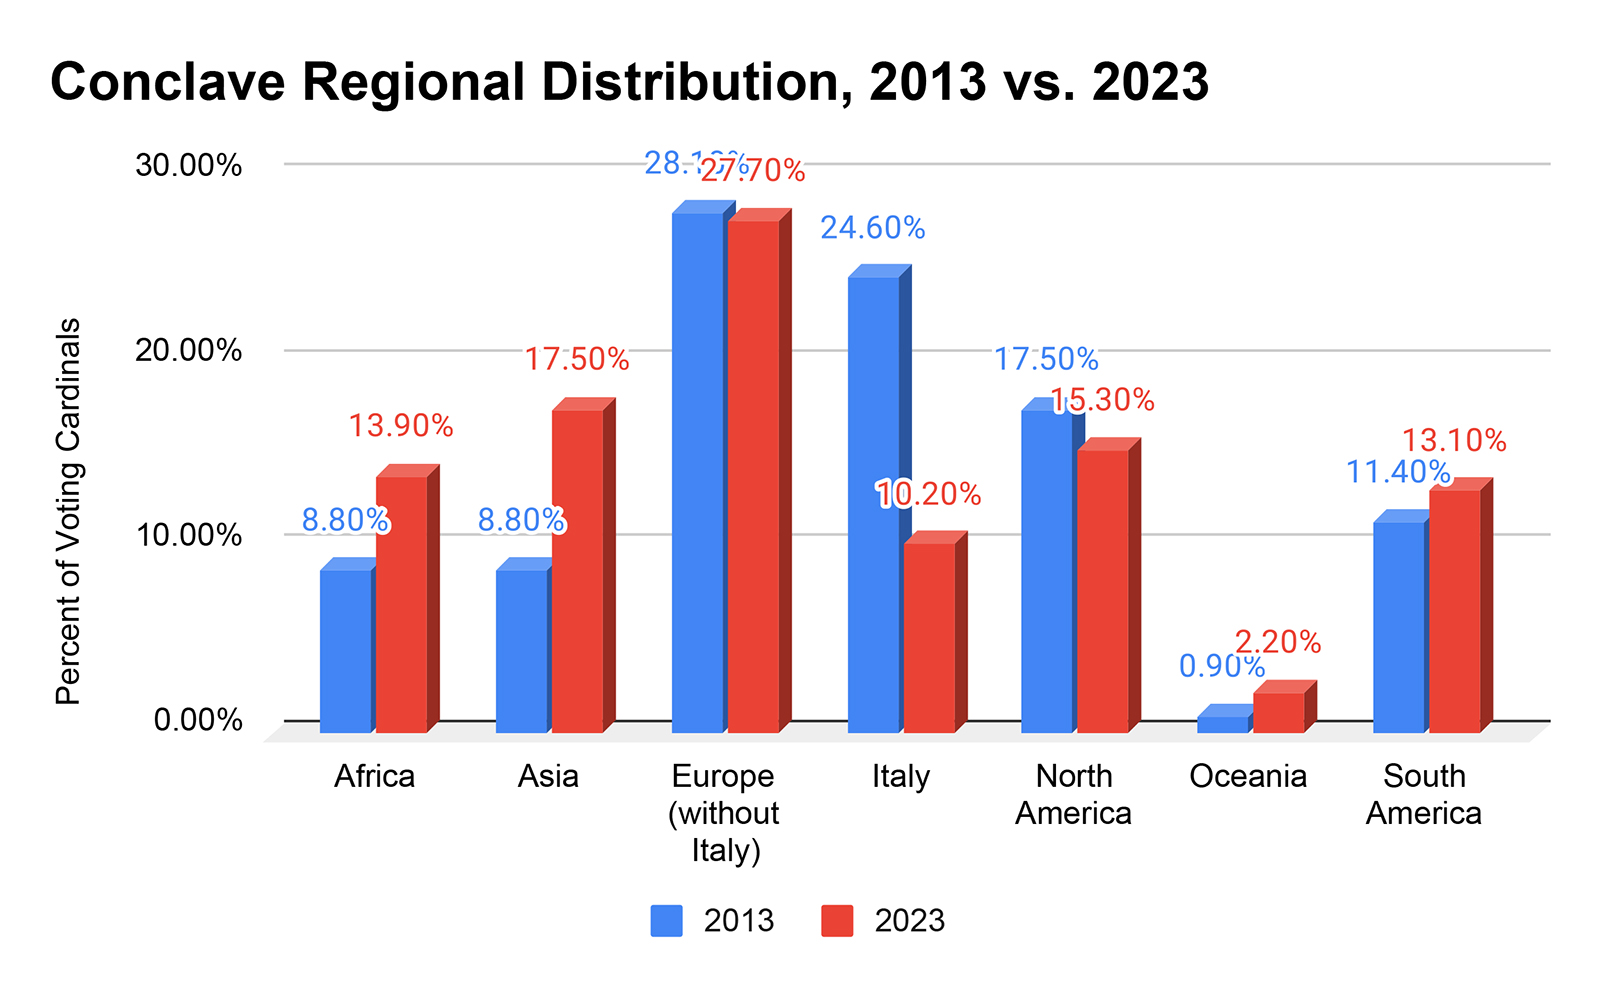 "Conclave Regional Distribution, 2013 vs. 2023" Sources: Publicly available Vatican data, Wikipedia, independent RNS reporting. RNS graphic